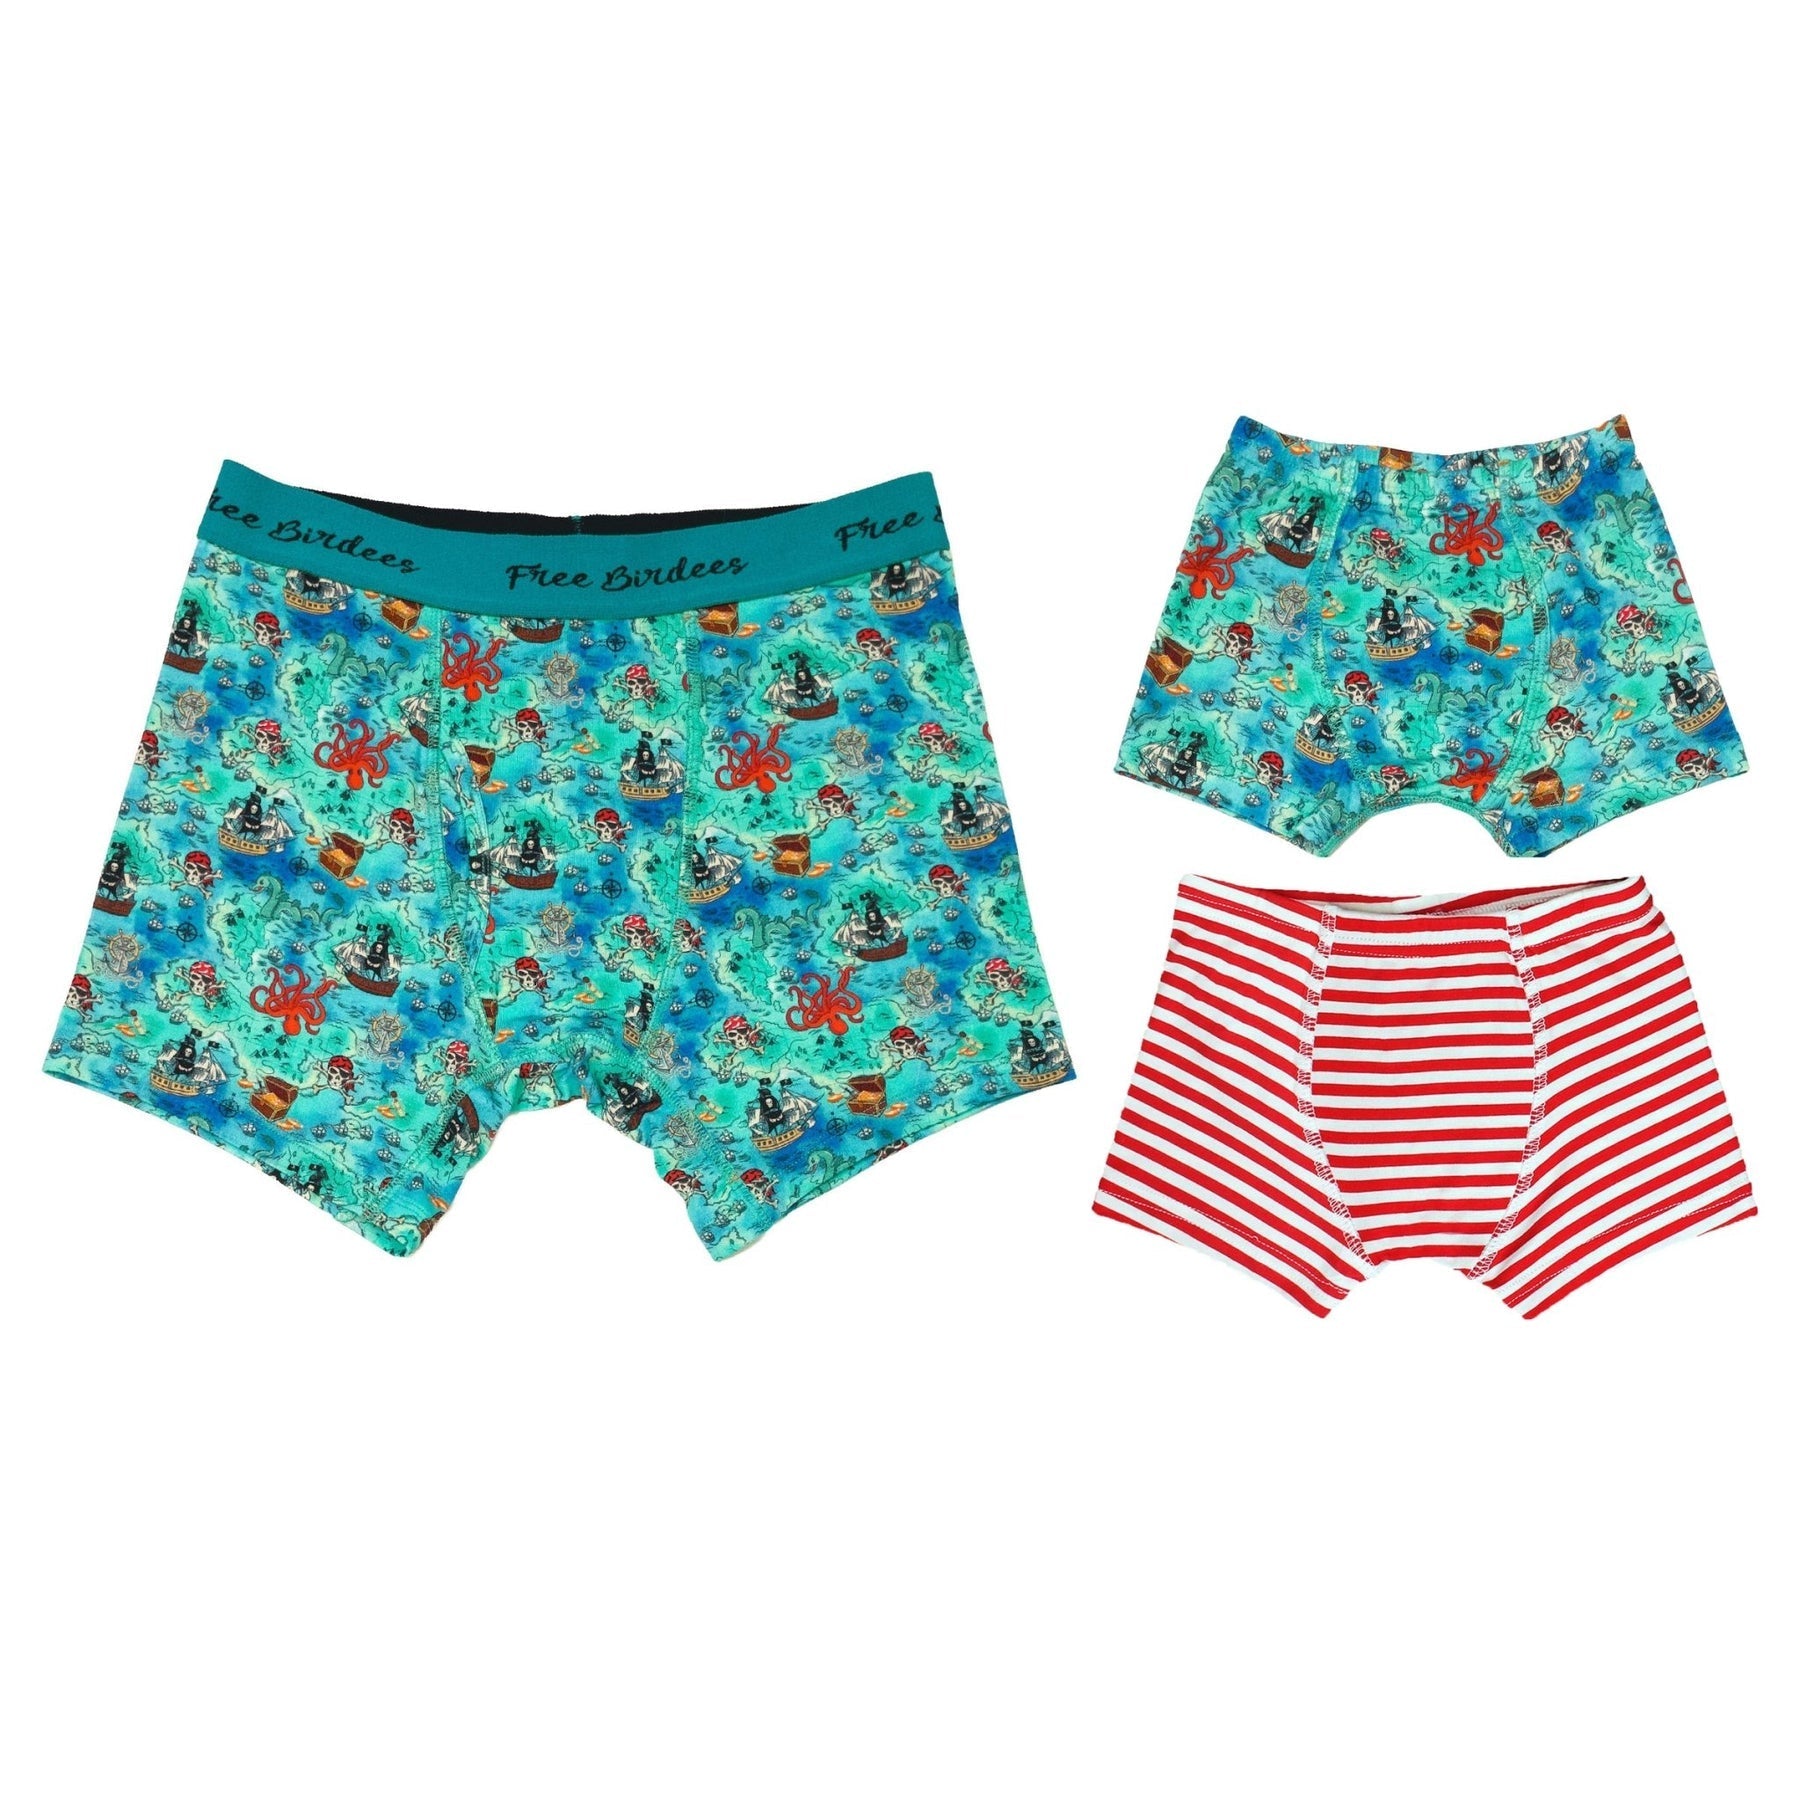 How to Choose the best Underwear for Children and Adults – Free Birdees